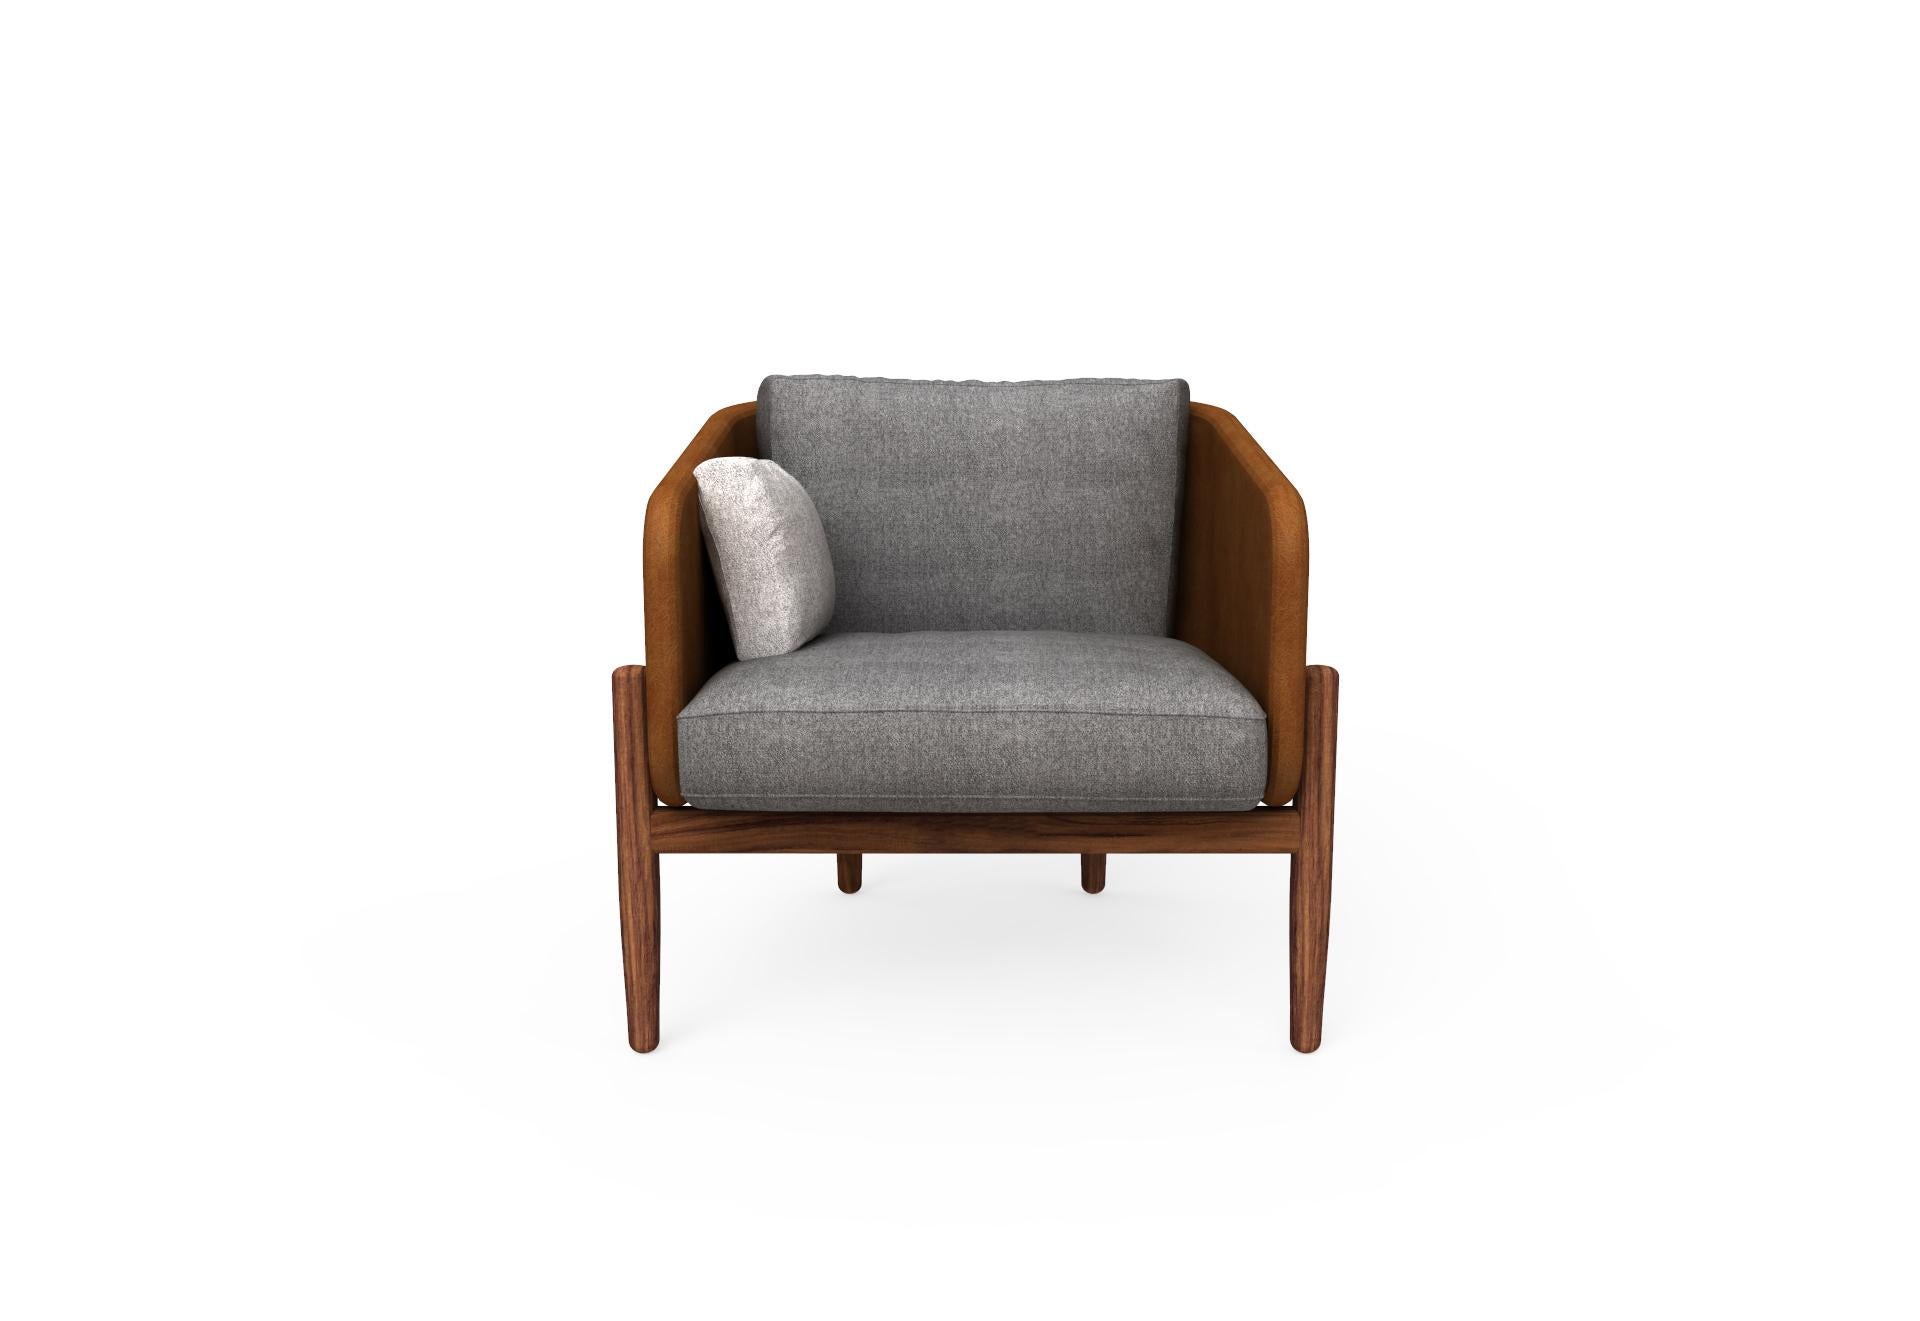 The Guerrero armchair is a favorite best seller since it was first designed in 2015. A great piece for a small waiting area,  it’s so comfortable that it also makes for a perfect reading chair. Made of solid Huanacaxtle tropical hardwood found in